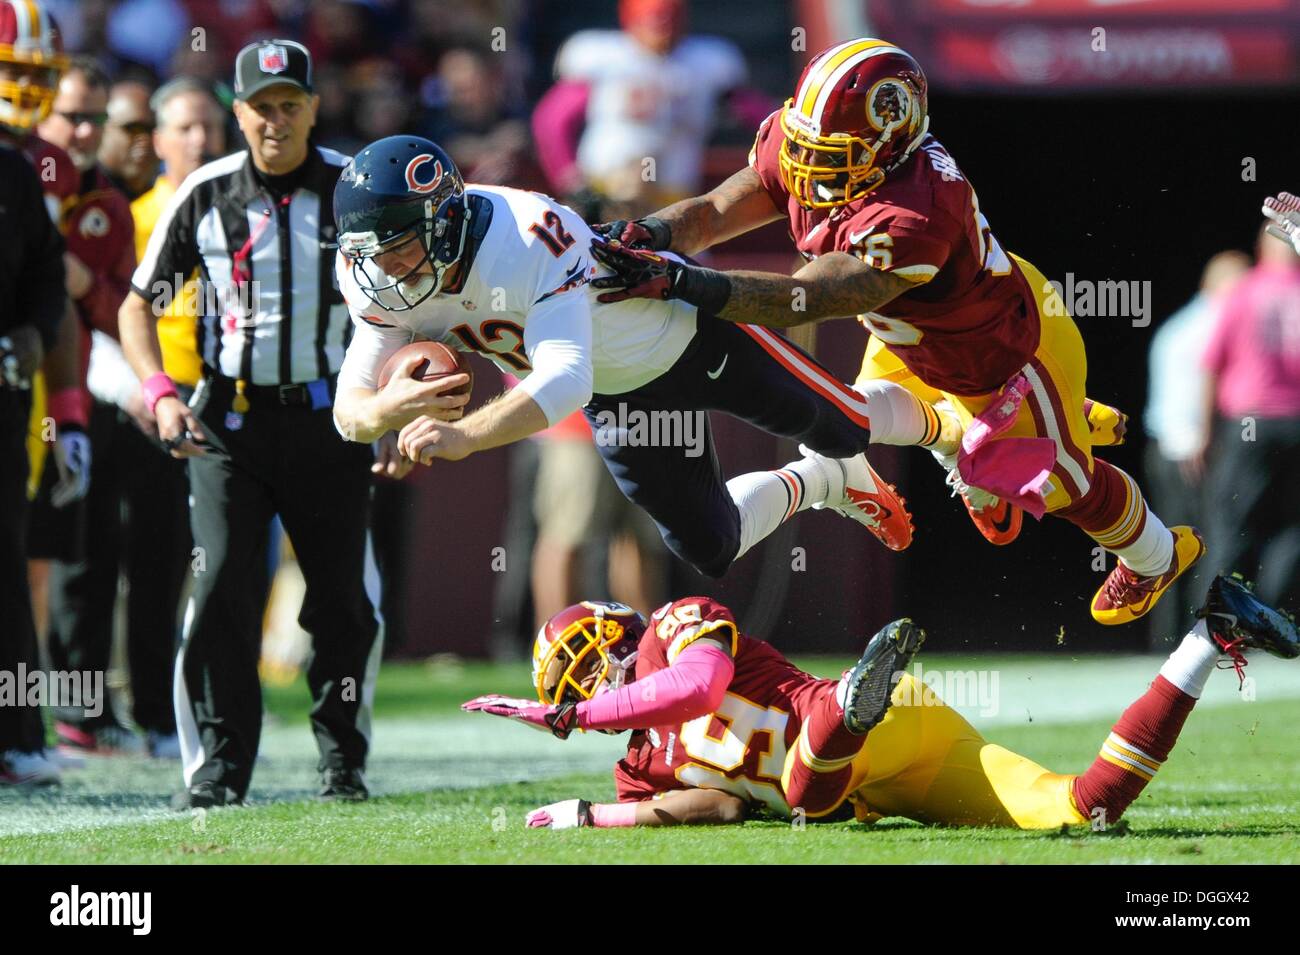 Landover, Maryland, USA. 21st Oct, 2013. OCT 20, 2013 : Chicago Bears quarterback Josh McCown (12) dives for the sideline as he gets hit by Washington Redskins inside linebacker Perry Riley (56) and Washington Redskins free safety David Amerson (39) during the matchup between the Chicago Bears and the Washington Redskins at FedEx Field in Landover, MD. © csm/Alamy Live News Stock Photo